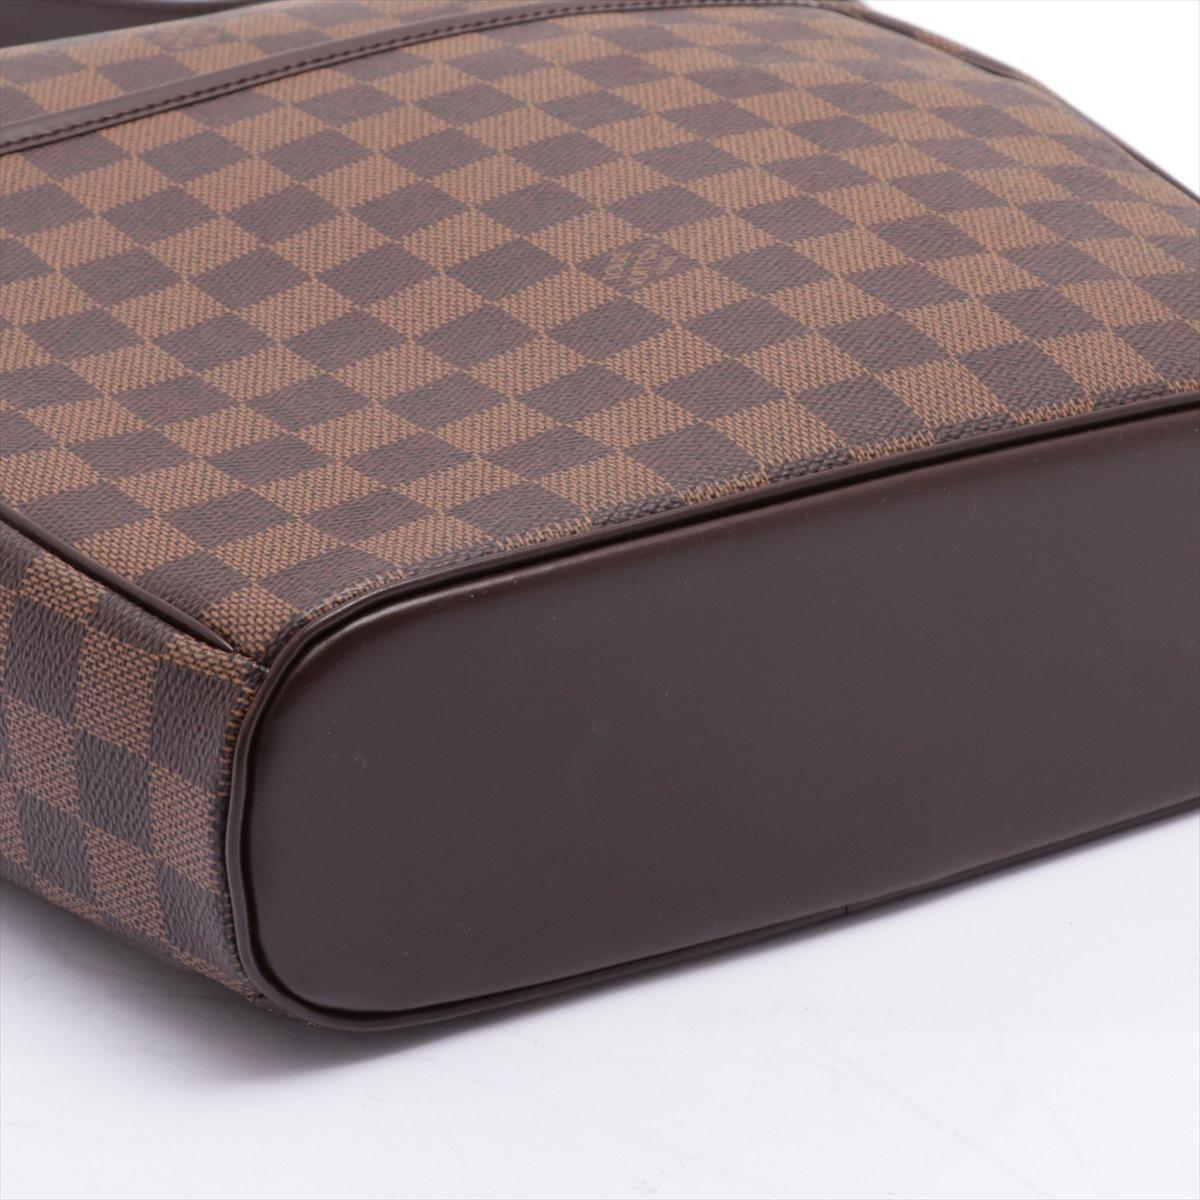 Louis Vuitton Damier Ebene Canvas Leather Ipanema GM Shoulder Bag In Good Condition For Sale In Irvine, CA